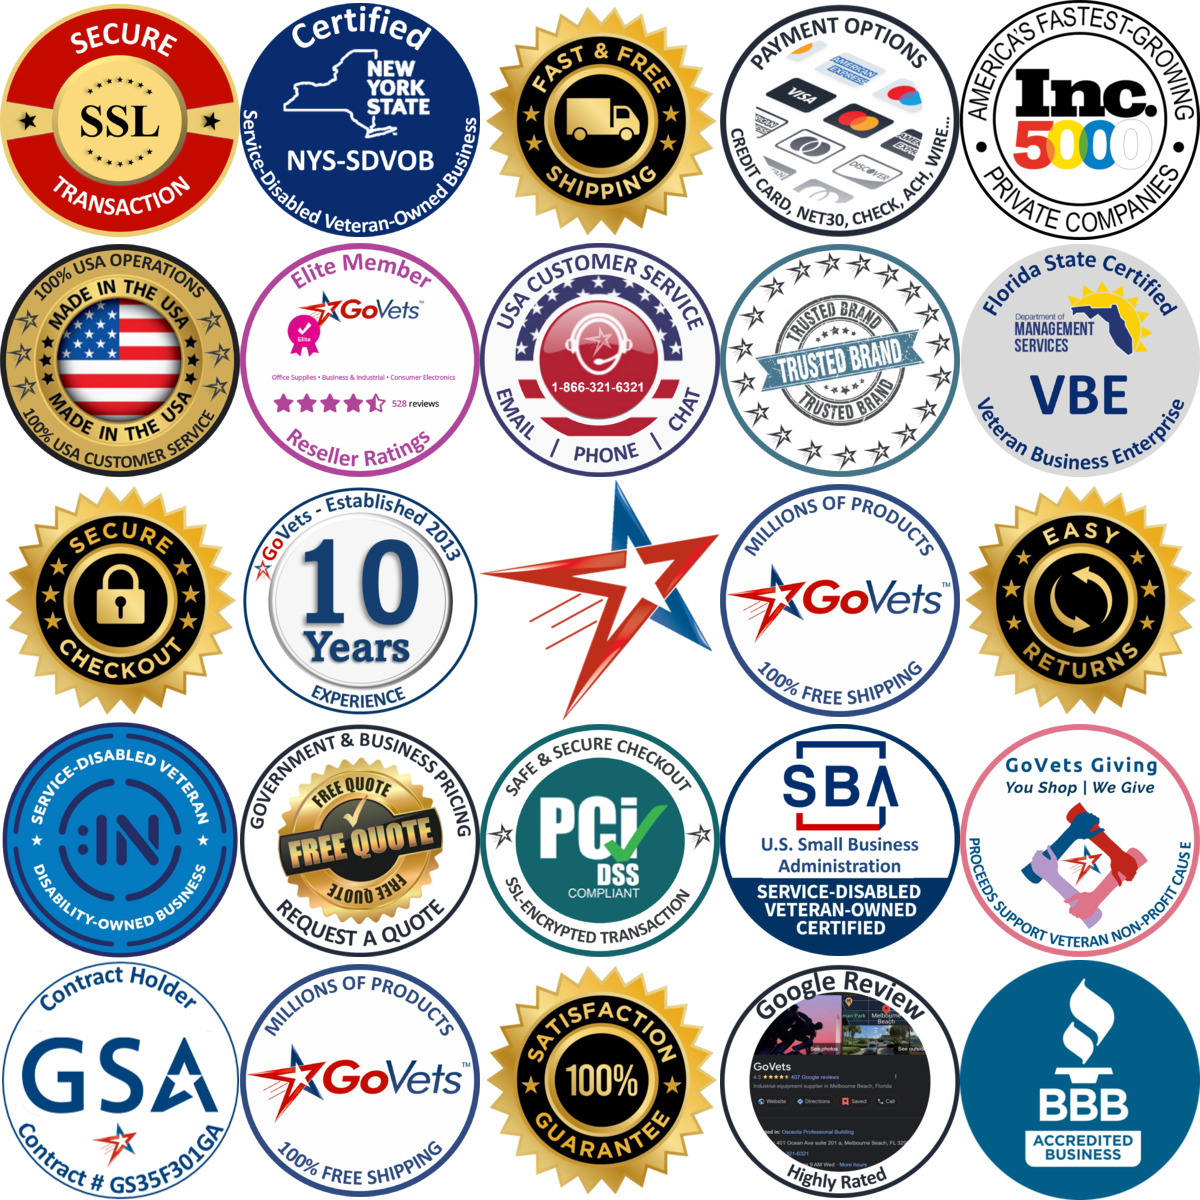 A selection of Pins products on GoVets